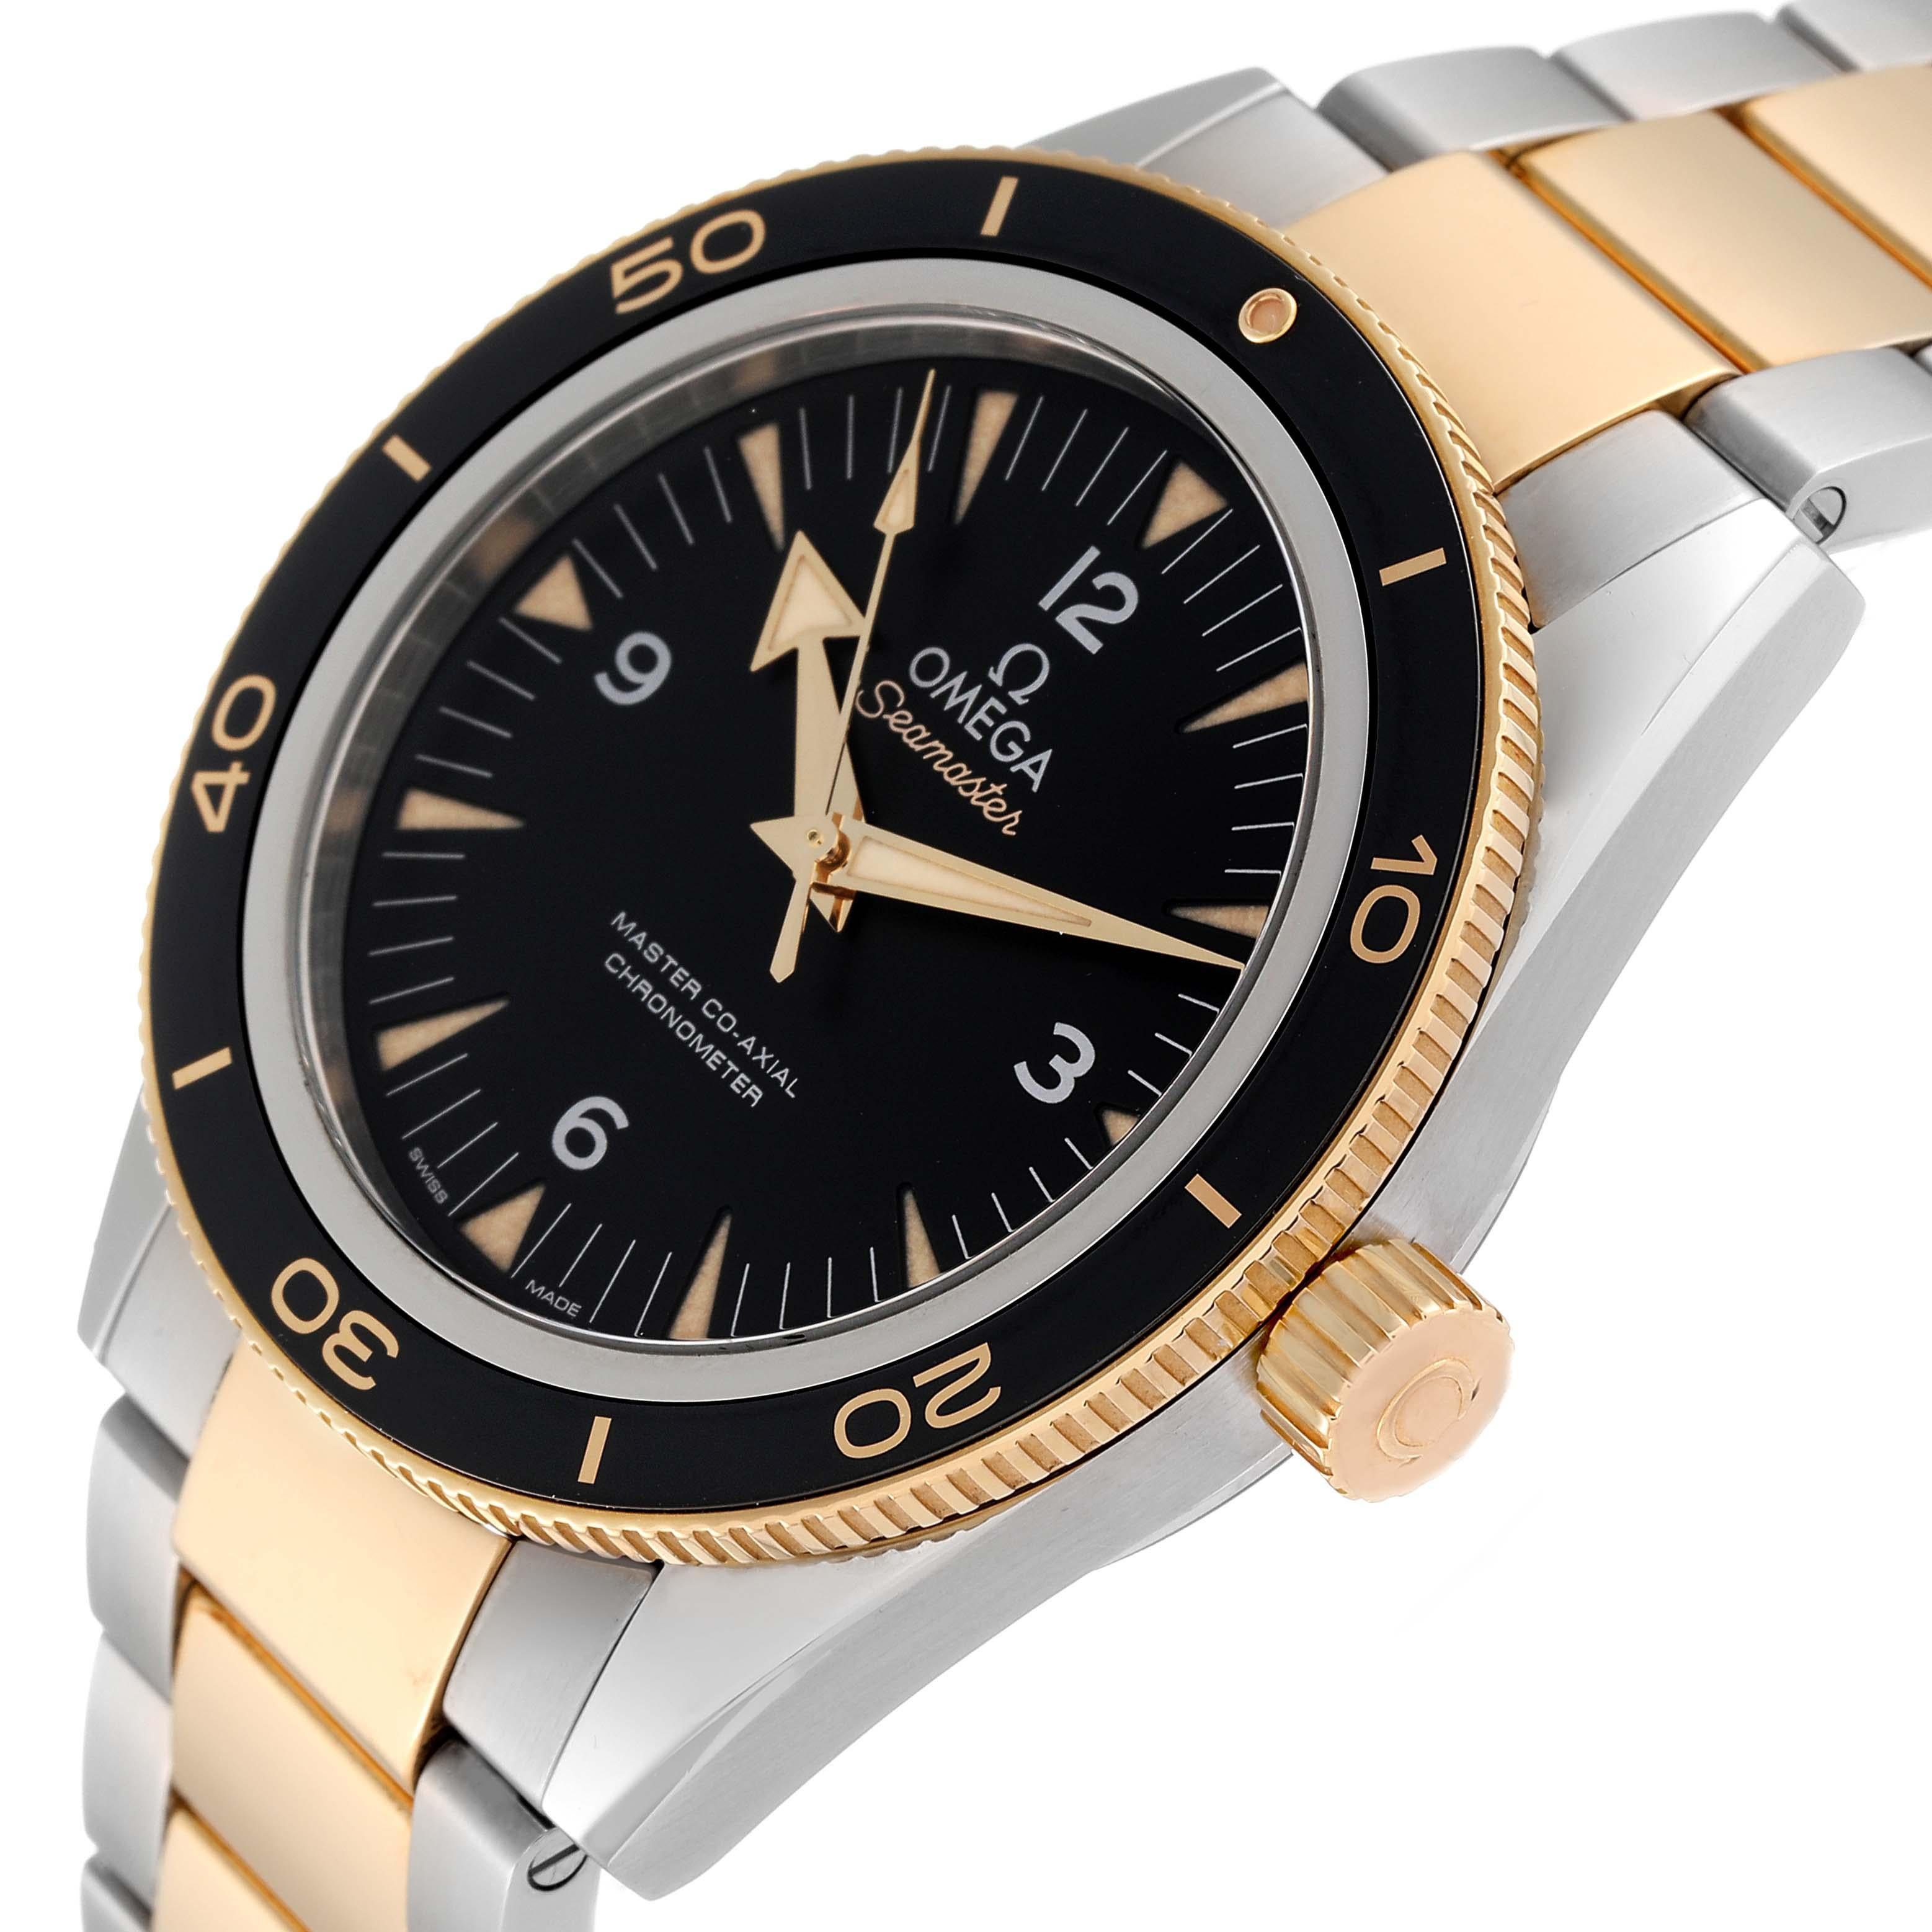 Men's Omega Seamaster 300M Steel Yellow Gold Mens Watch 233.20.41.21.01.002 Card For Sale